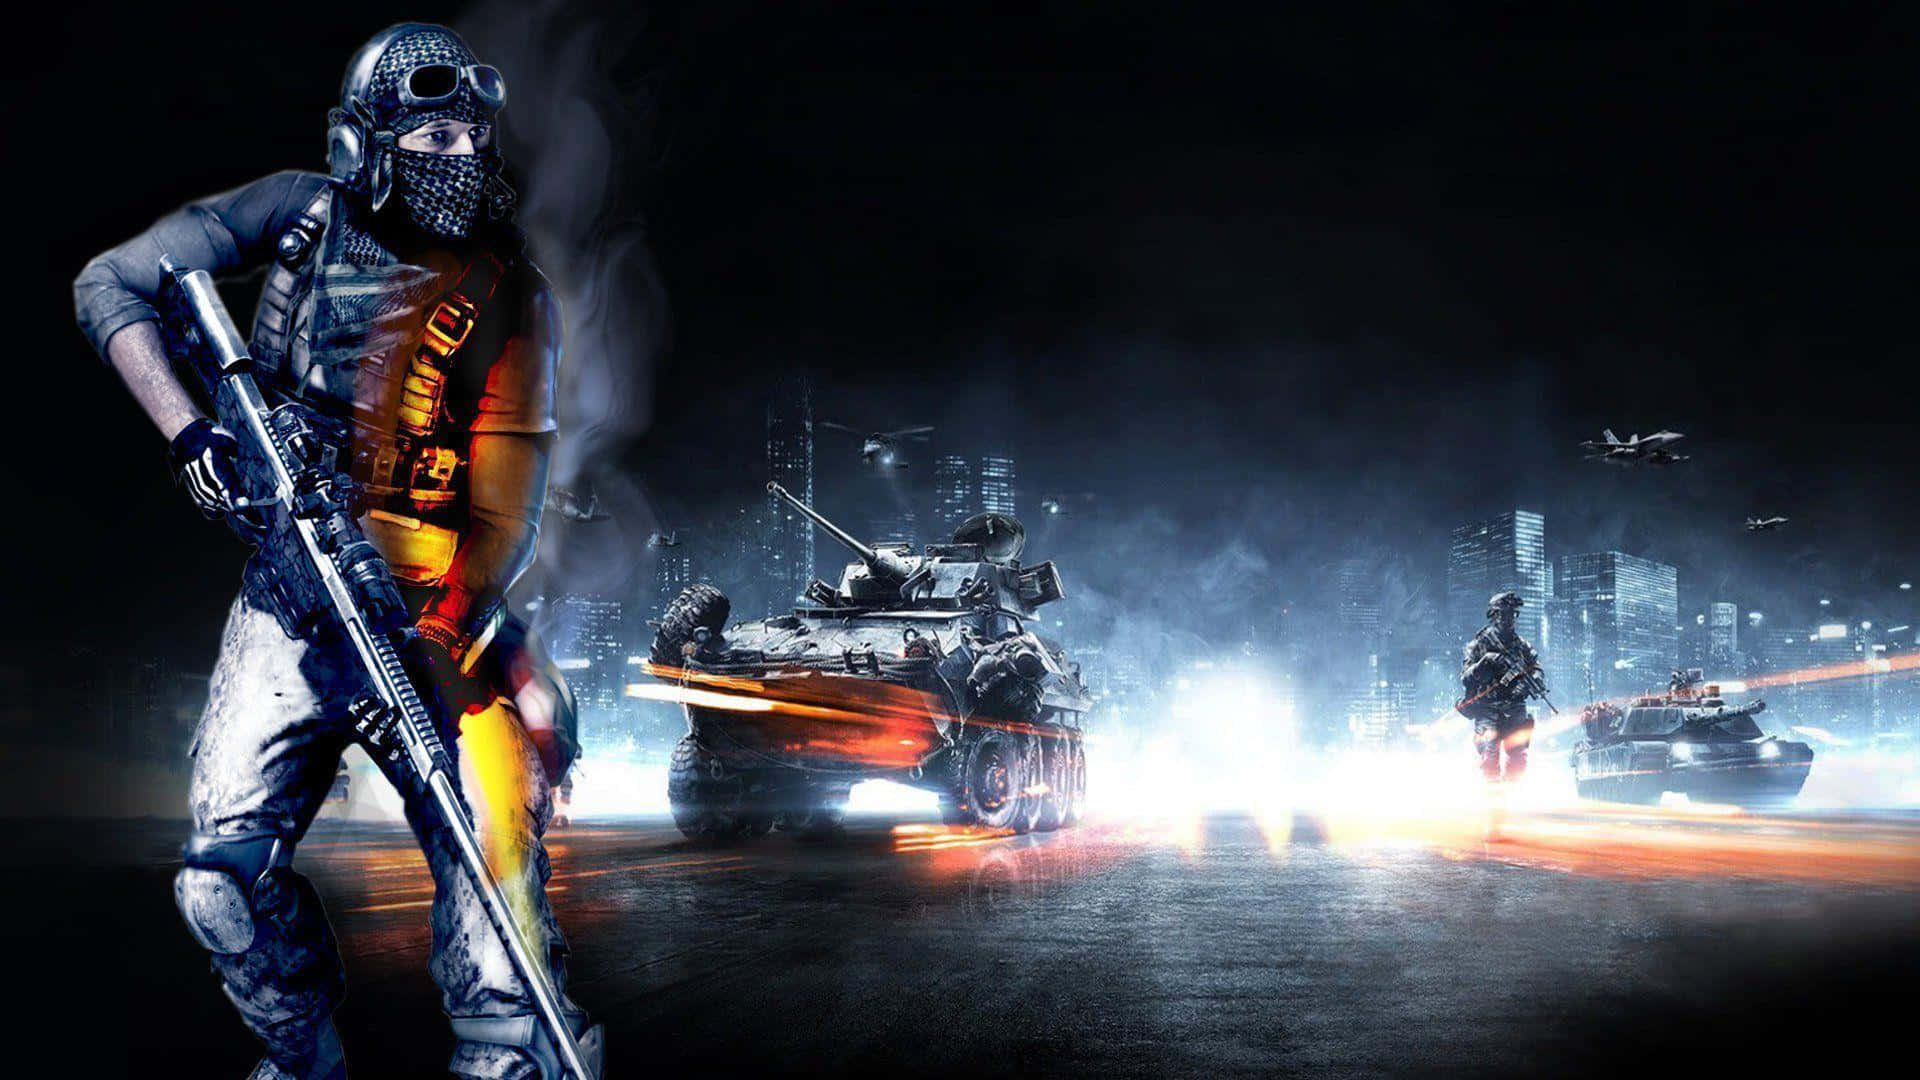 Take the fight to the enemy in Battlefield 3